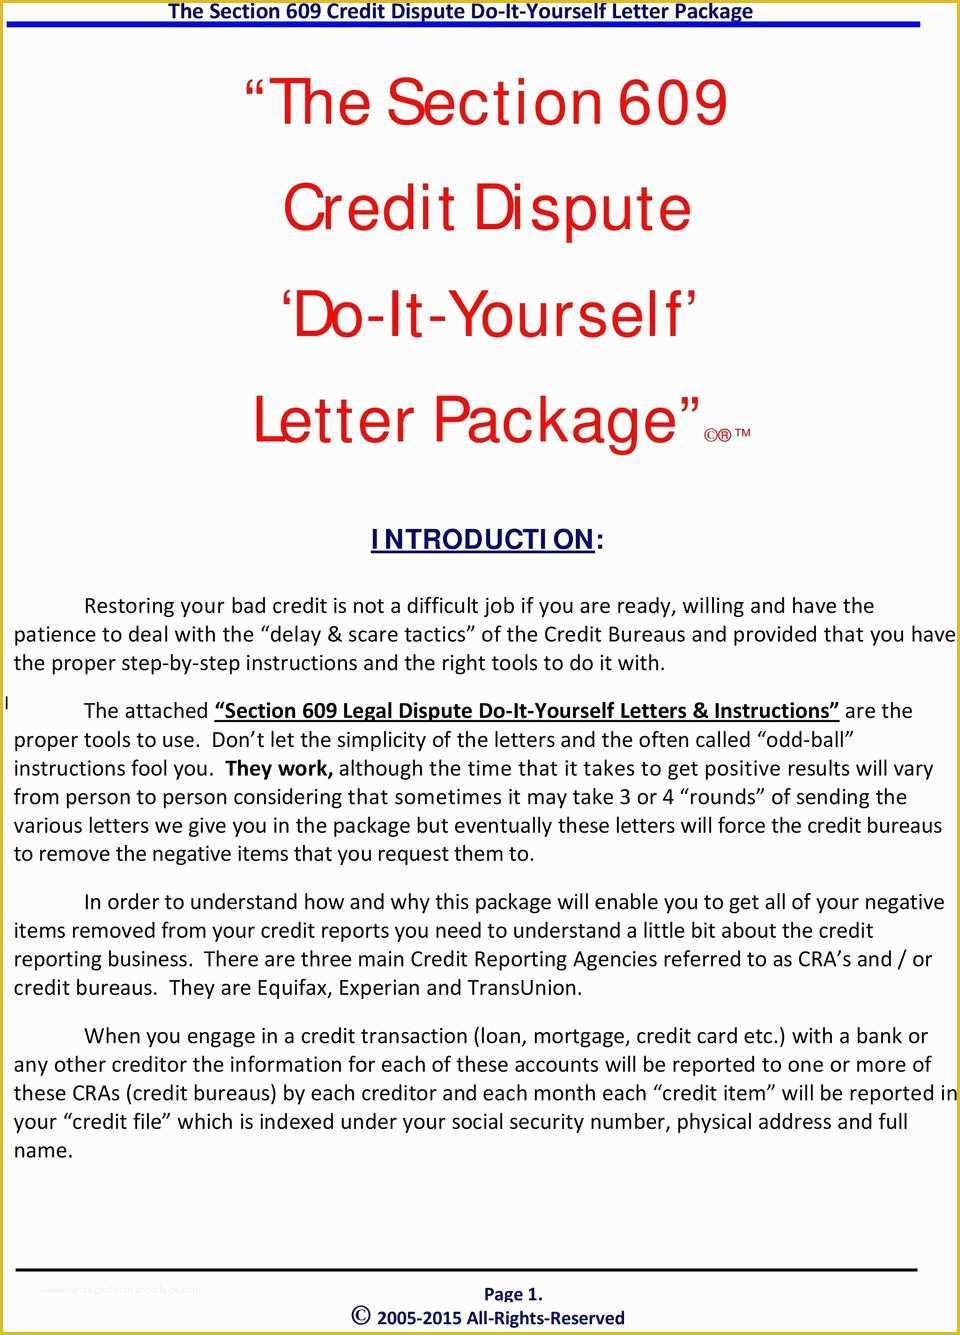 Free Section 609 Credit Dispute Letter Template Of the Section 609 Credit Dispute Do It Yourself Letter